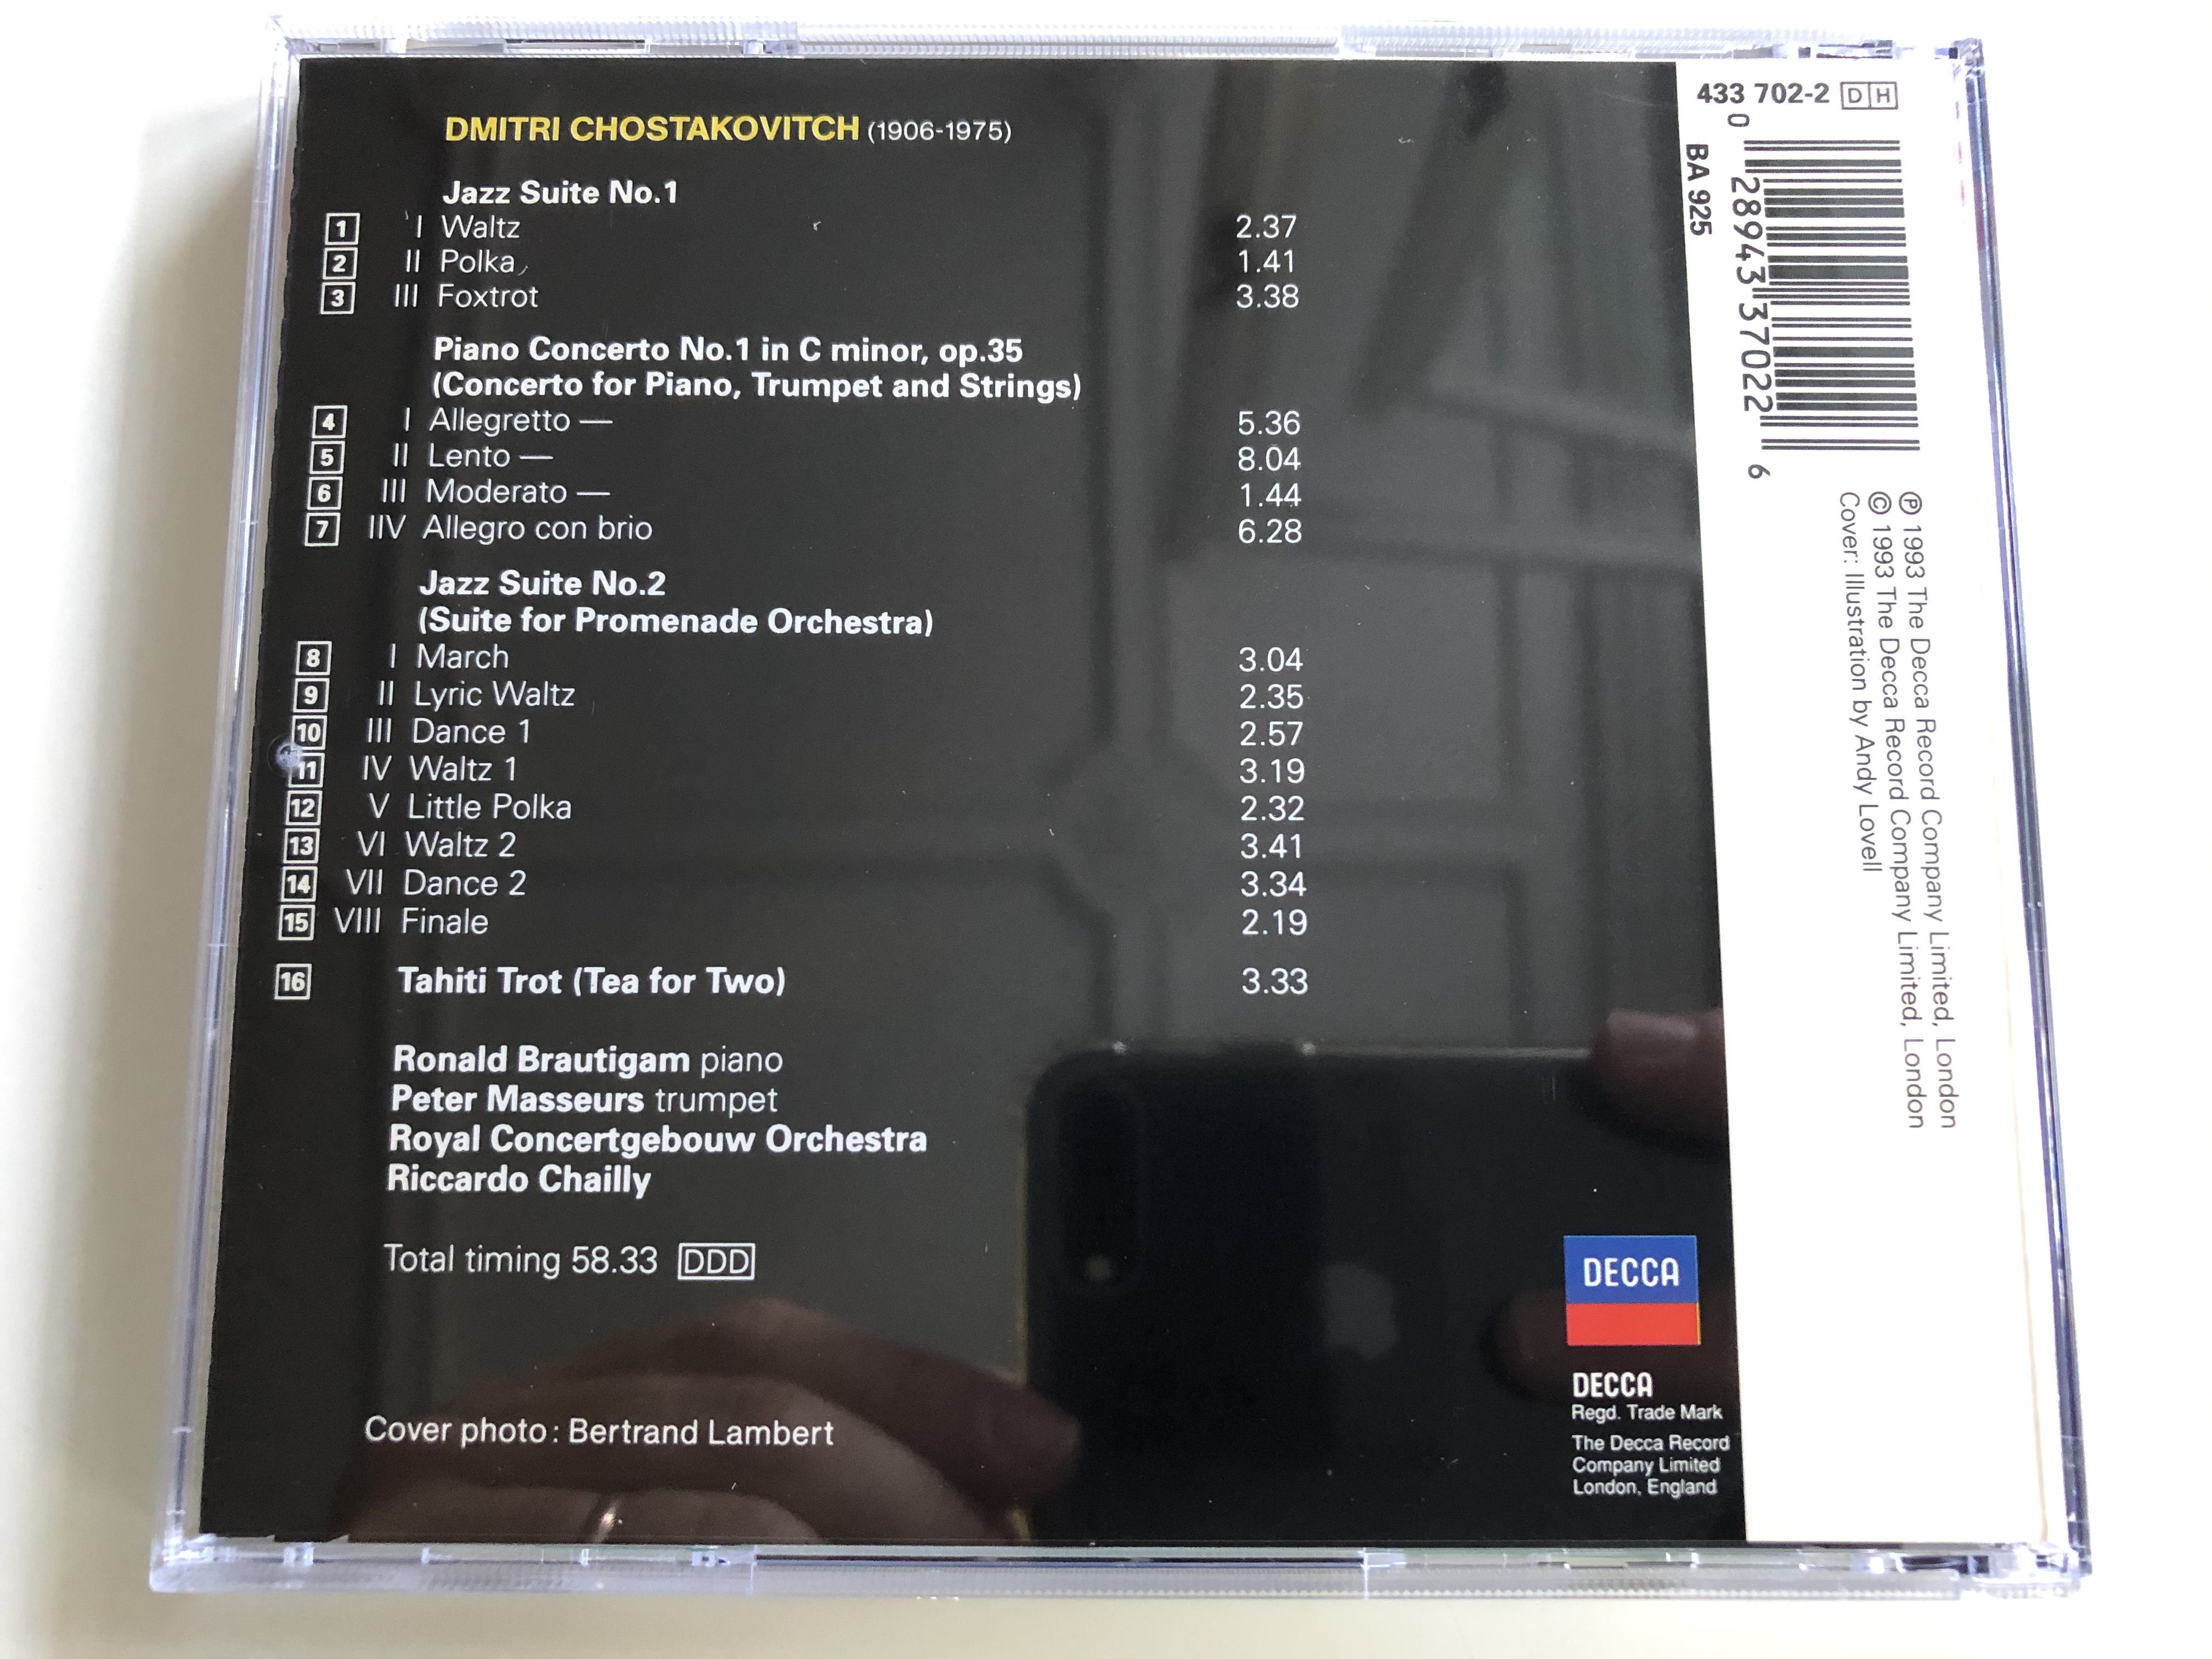 chostakovitch-jazz-music-jazz-suites-1-2-piano-concerto-no.-1-tea-for-two-brautigam-masseurs-royal-concertgebouw-orchestra-riccardo-chailly-decca-audio-cd-1993-stereo-433-702-2-1-7-.jpg